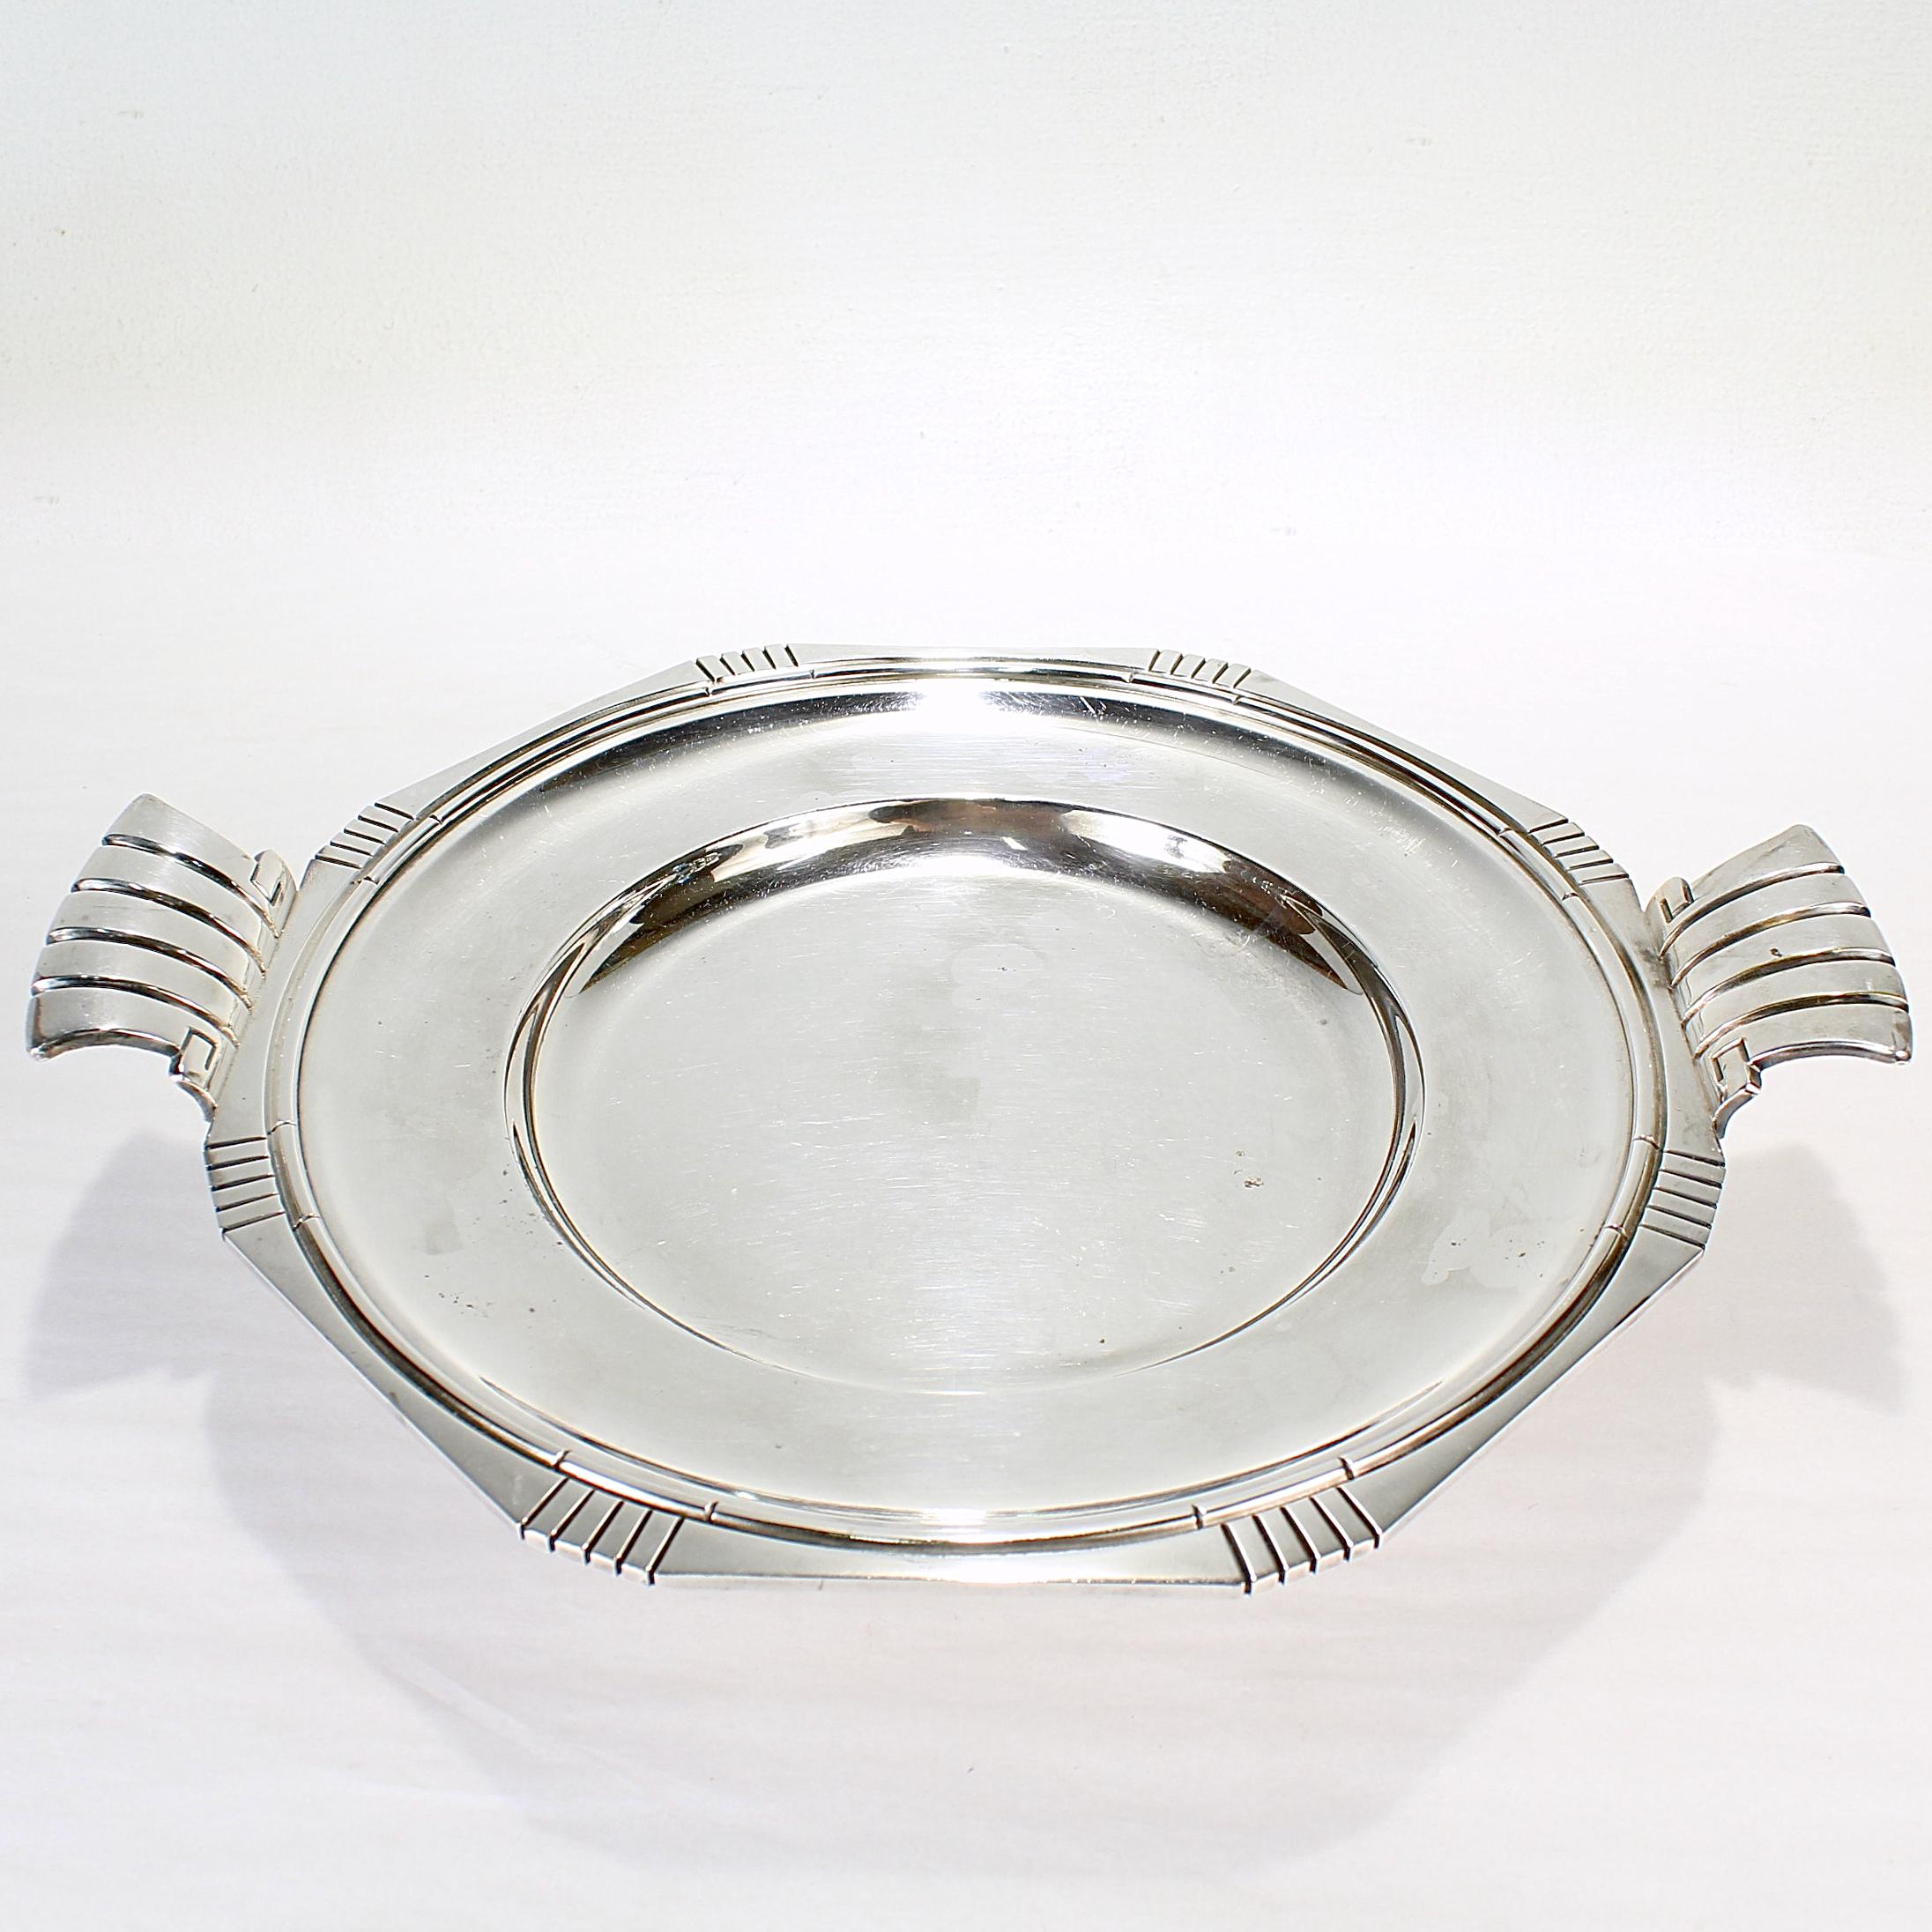 Signed Antique French Art Deco Silver Plated Tazza or Table Centerpiece In Fair Condition For Sale In Philadelphia, PA